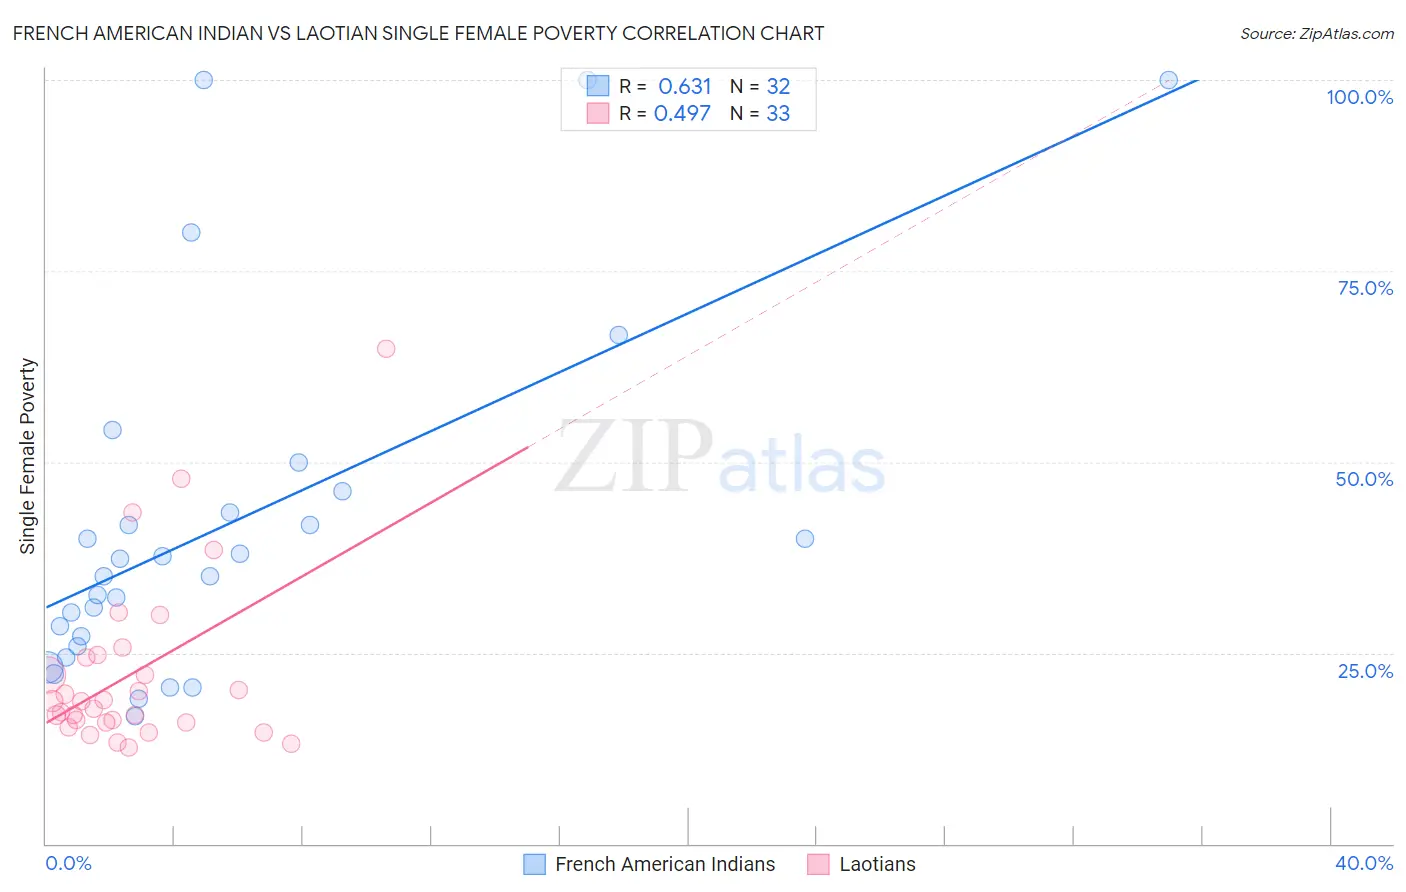 French American Indian vs Laotian Single Female Poverty